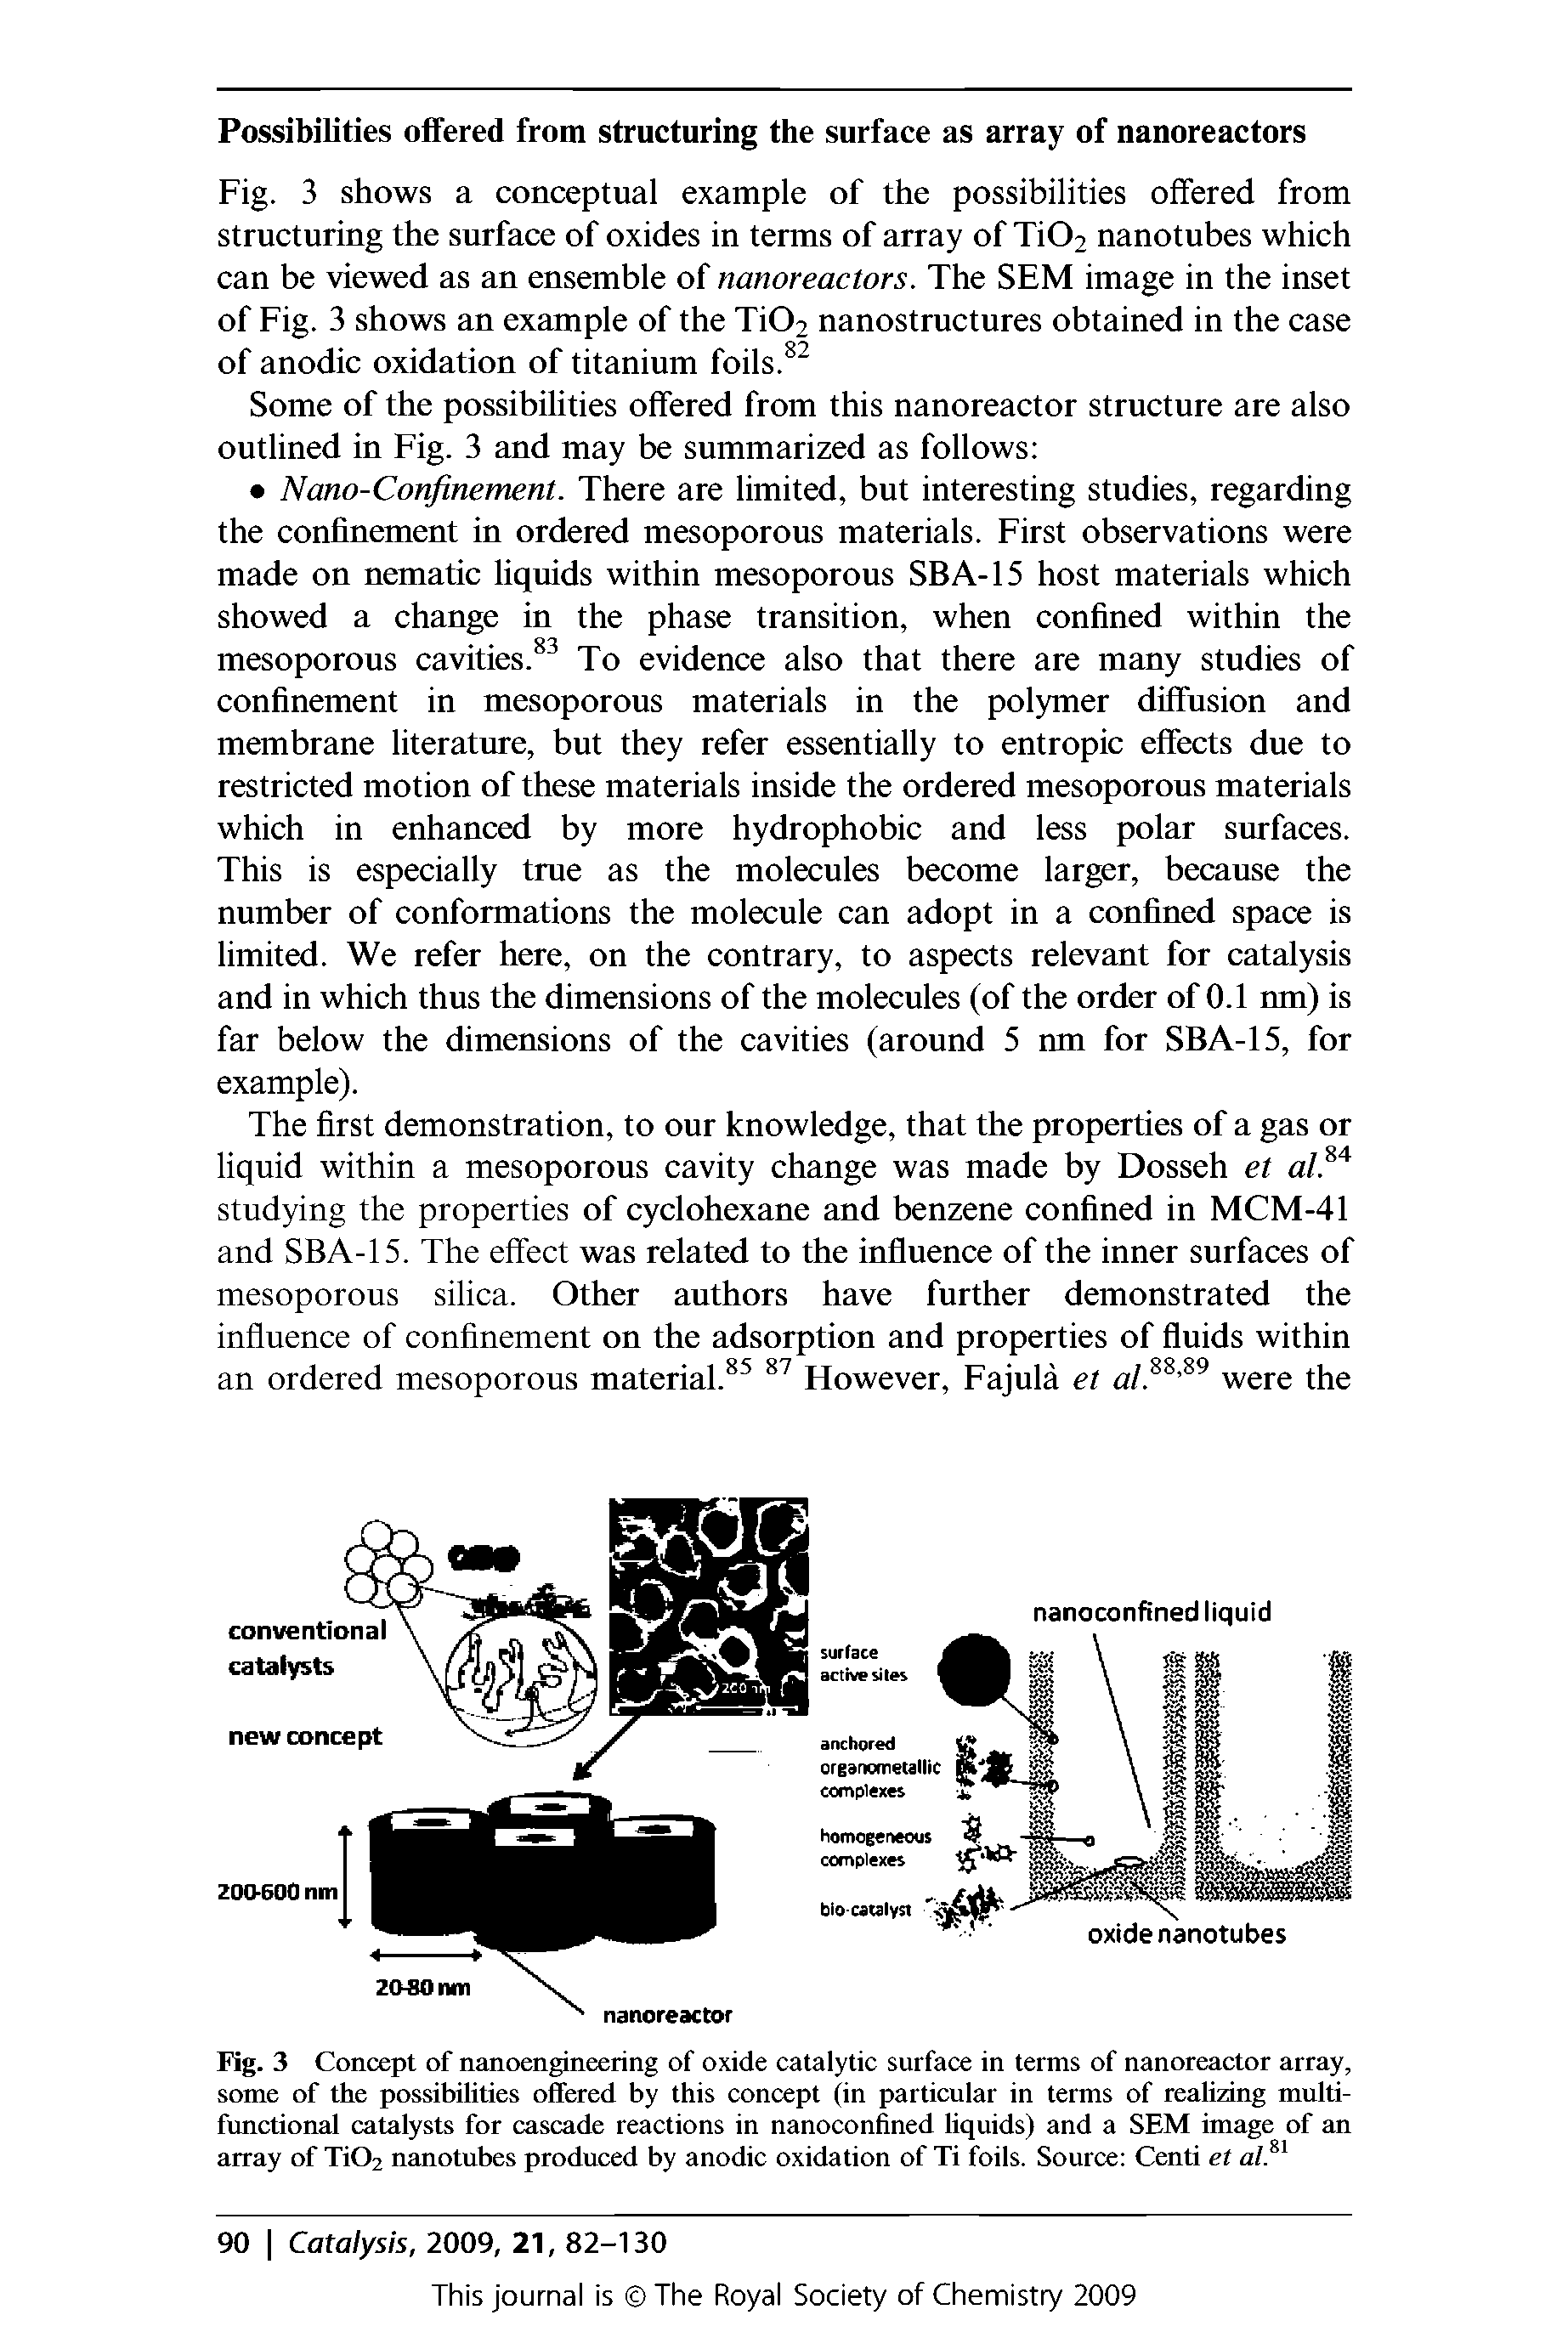 Fig. 3 Concept of nanoengineering of oxide catalytic surface in terms of nanoreactor array, some of the possibilities offered by this concept (in particular in terms of realizing multifunctional catalysts for cascade reactions in nanoconfined liquids) and a SEM image of an array of Xi02 nanotubes produced by anodic oxidation of Ti foils. Source Centi et alN...